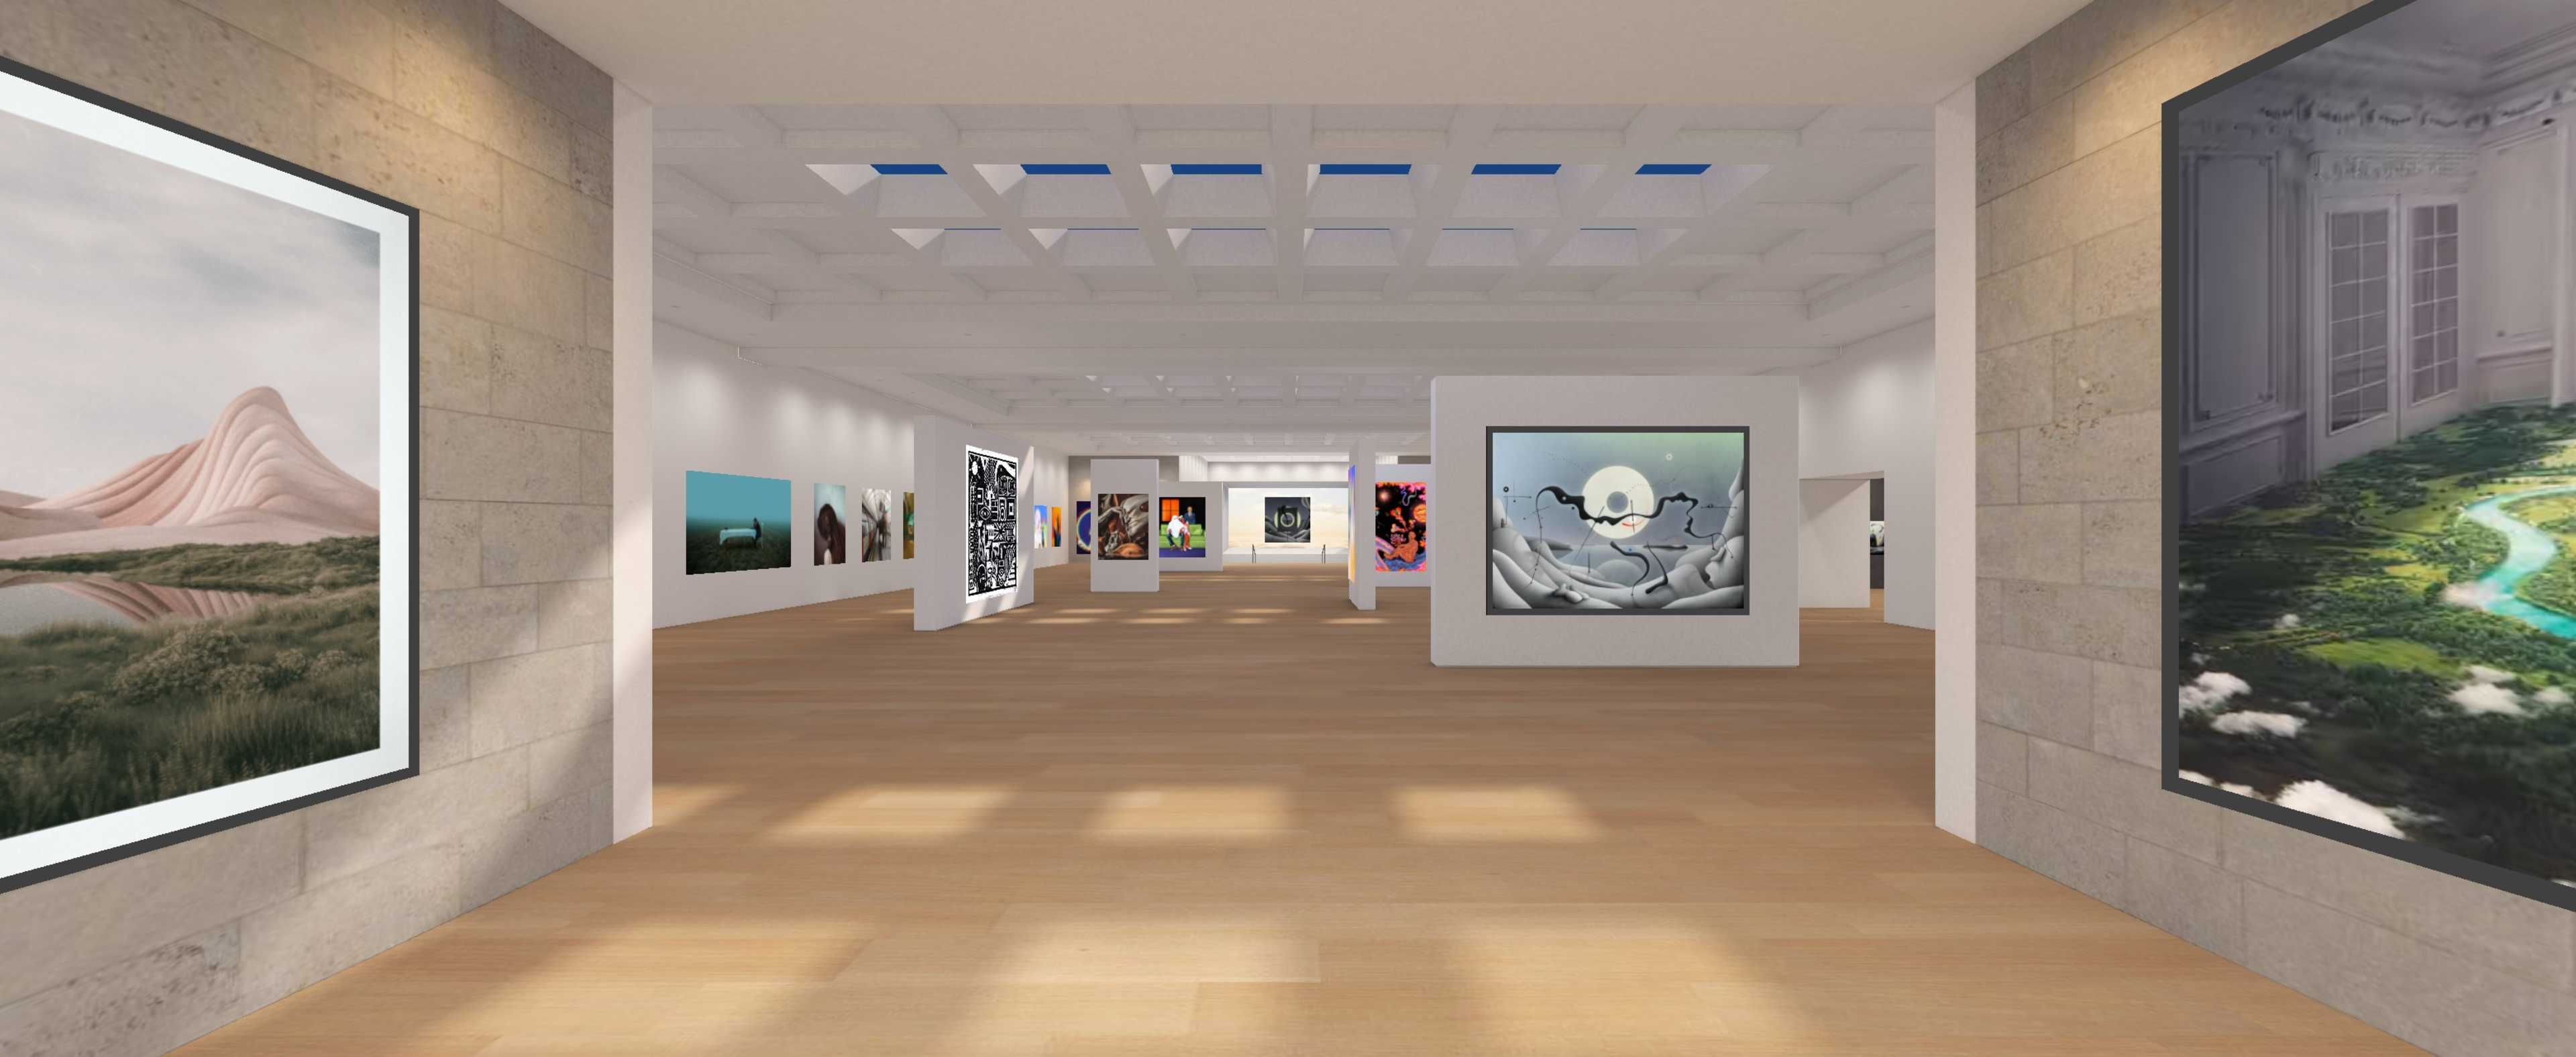 Voirol collection space